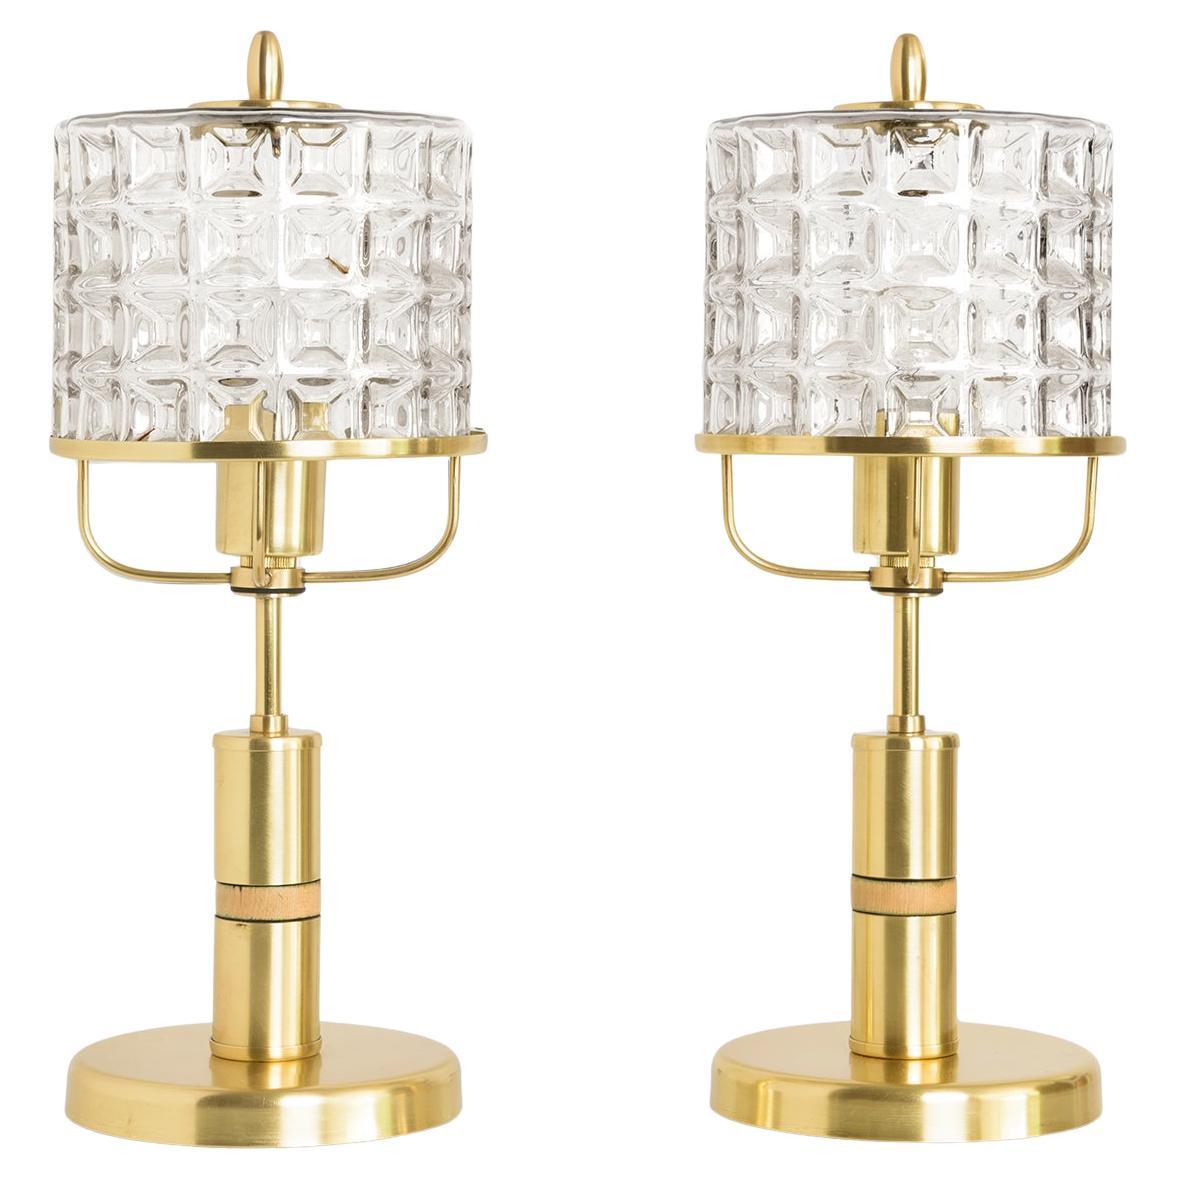 Pair of Kamenicky Senov mid-century Modern table lamps in brass glass shades